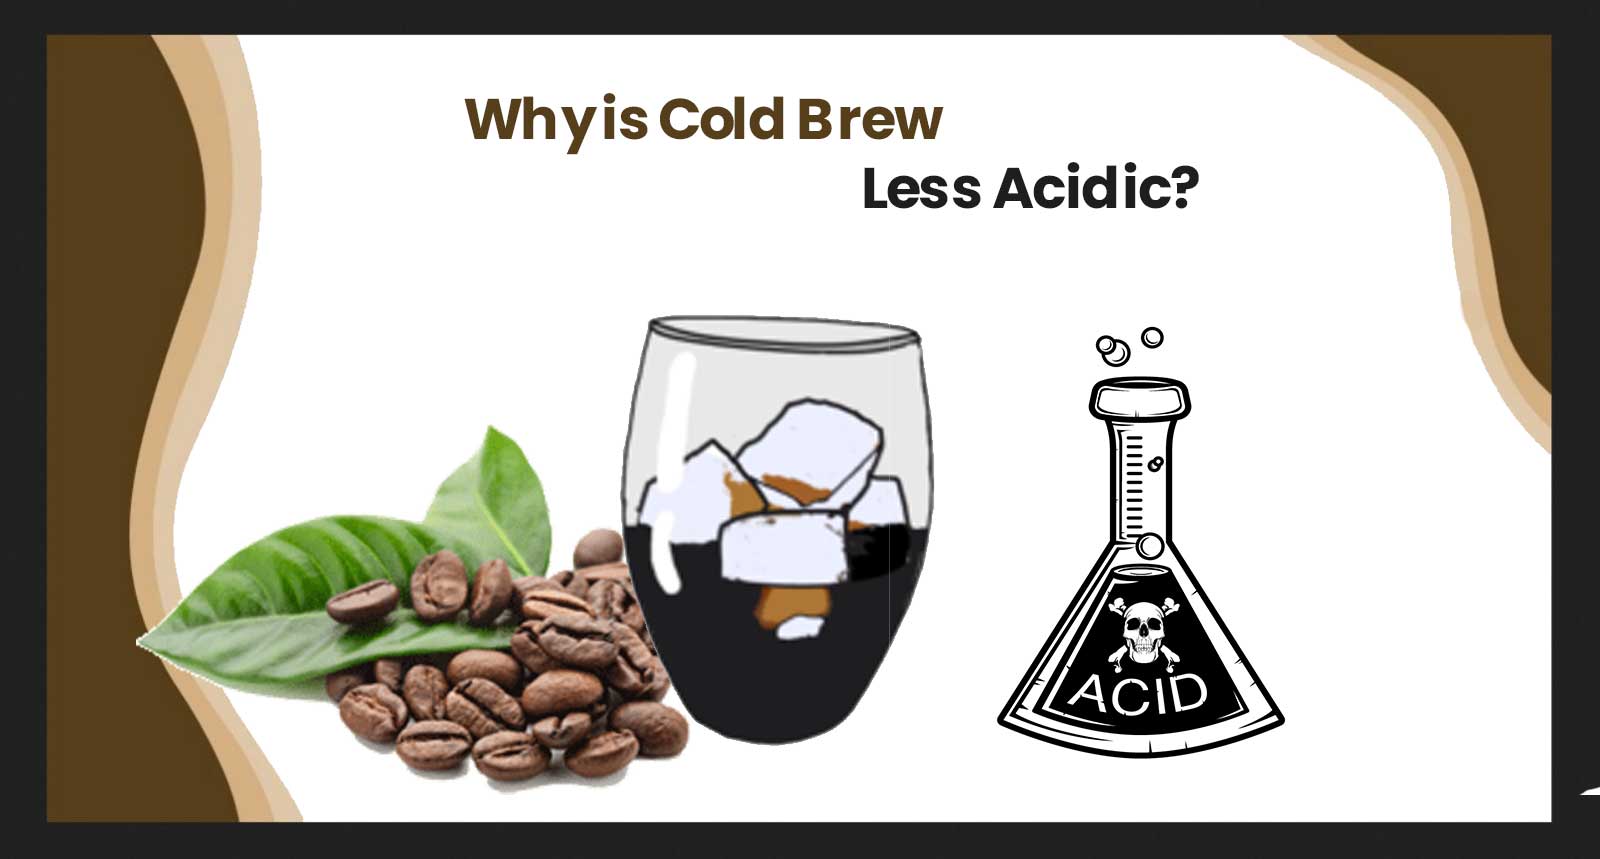 Why is Cold Brew Less Acidic